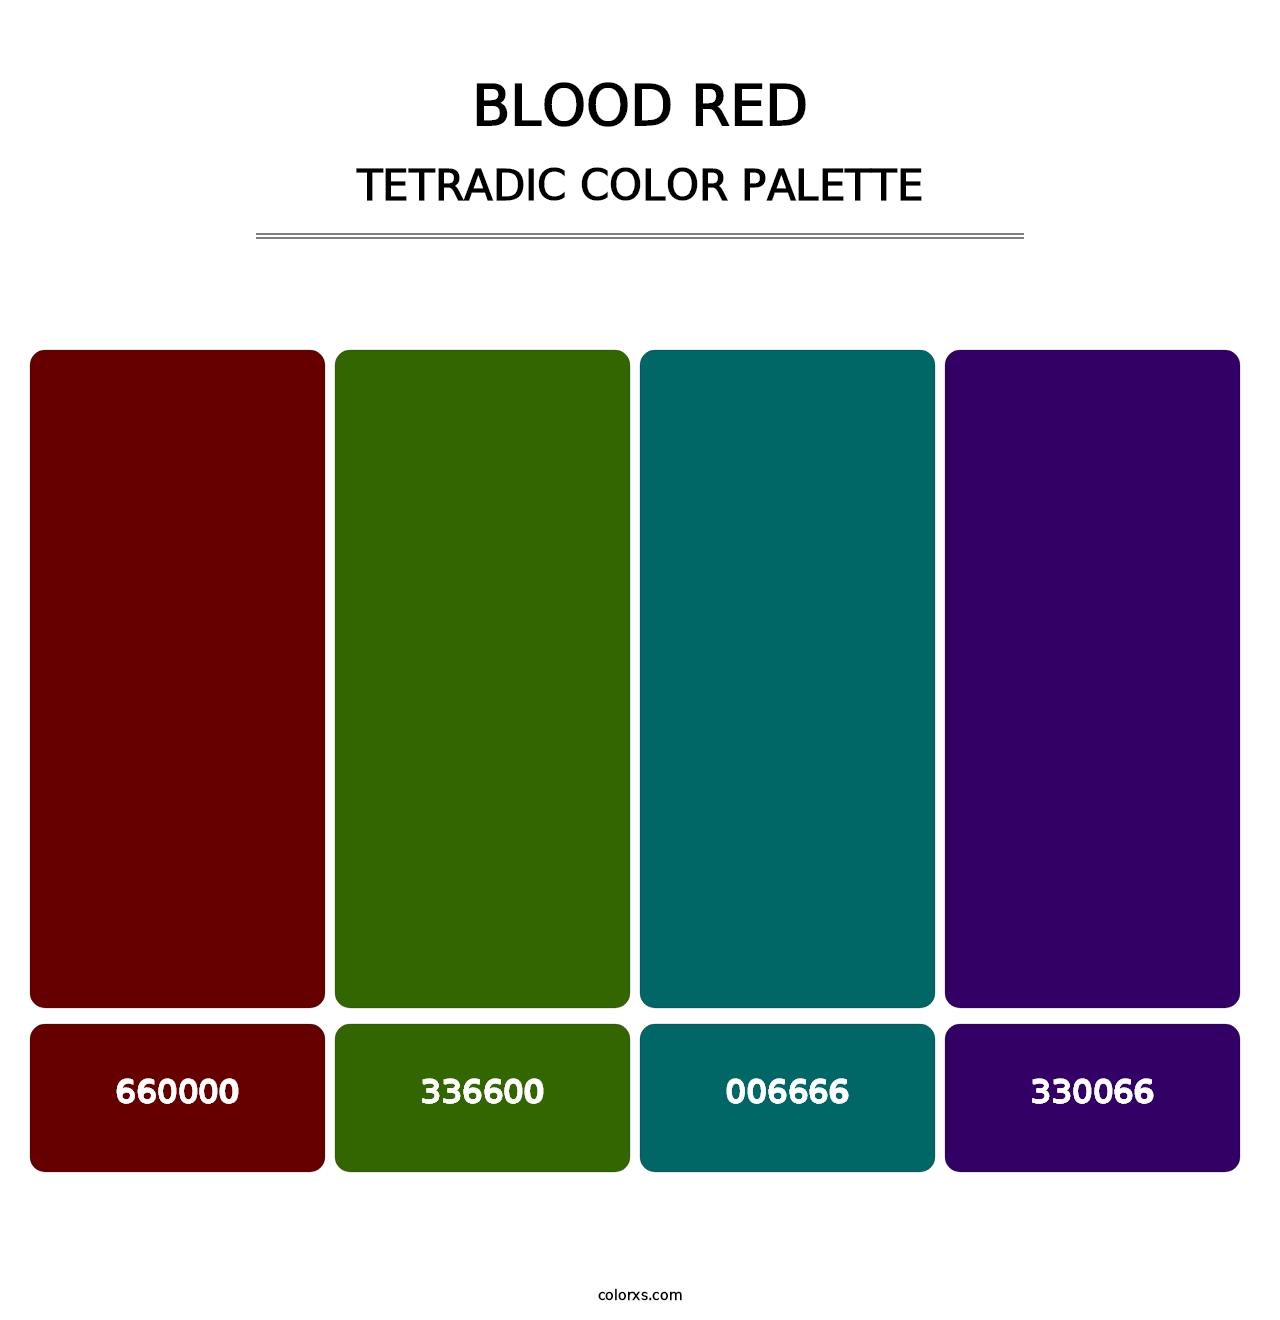 Blood Red - Tetradic Color Palette